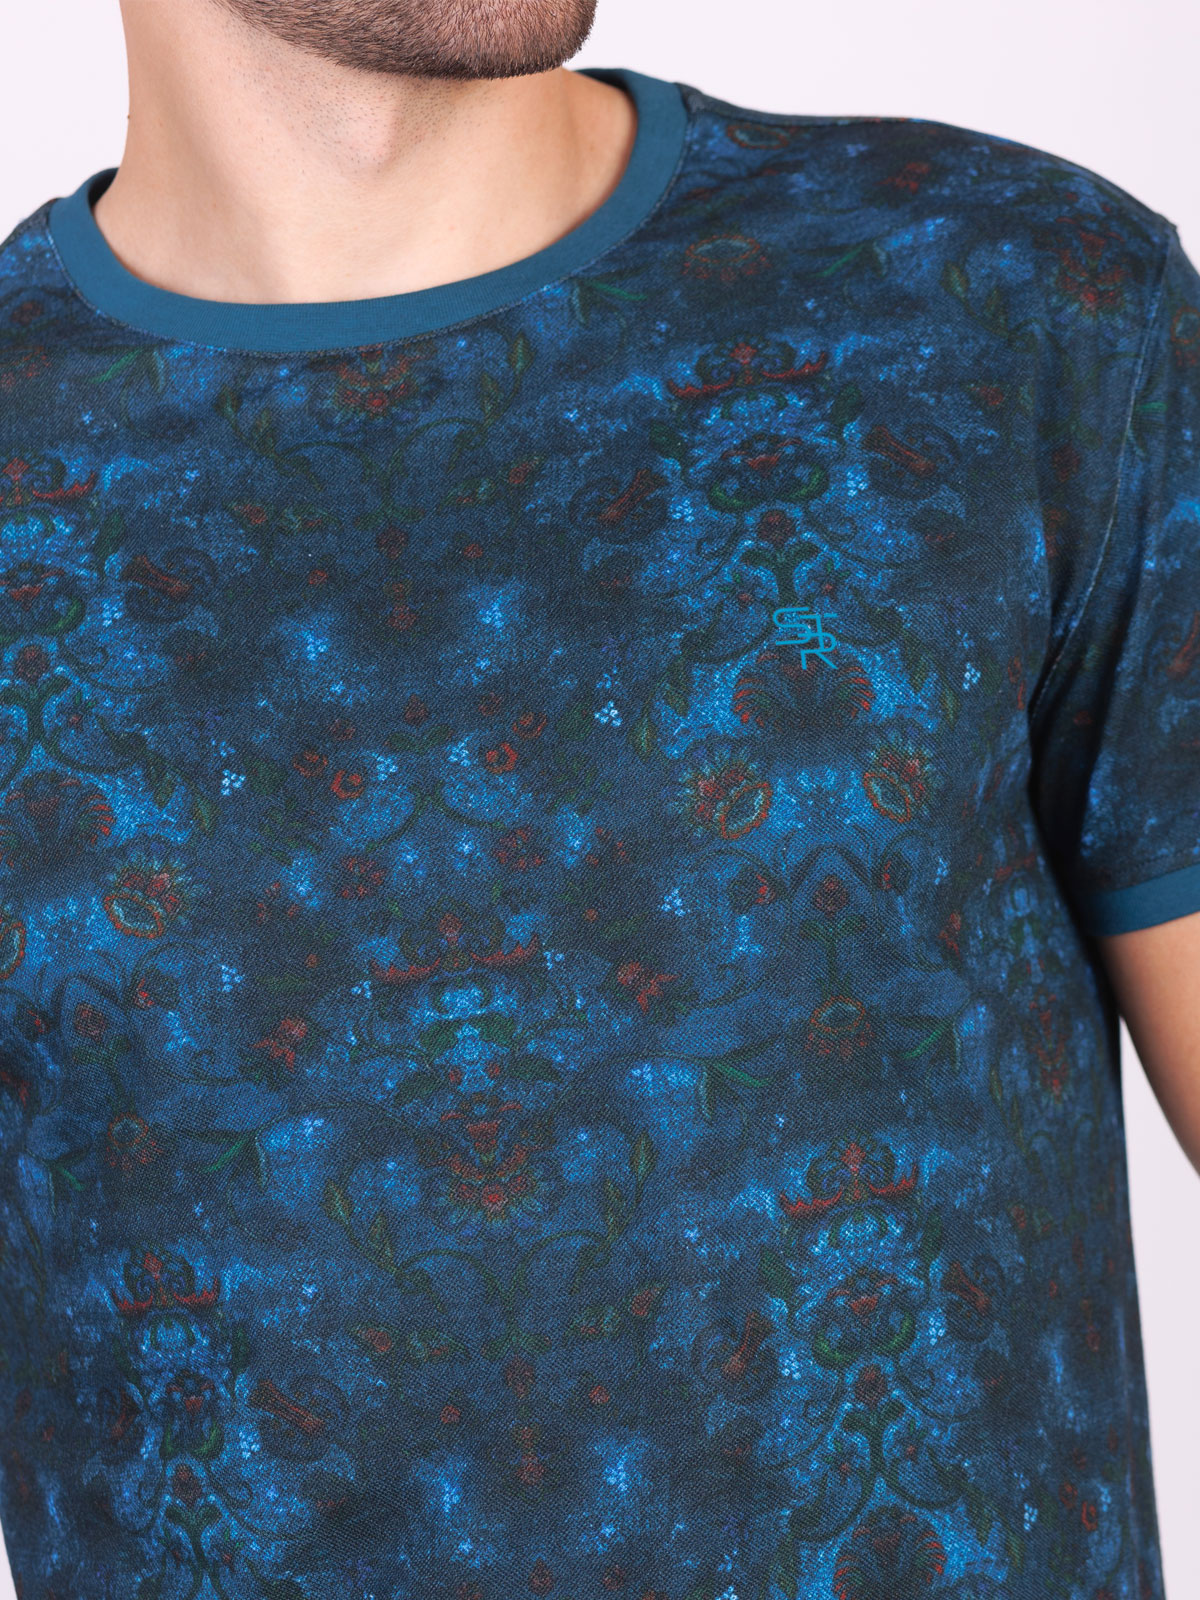 Tshirt turquoise with flowers - 95369 € 32.62 img3